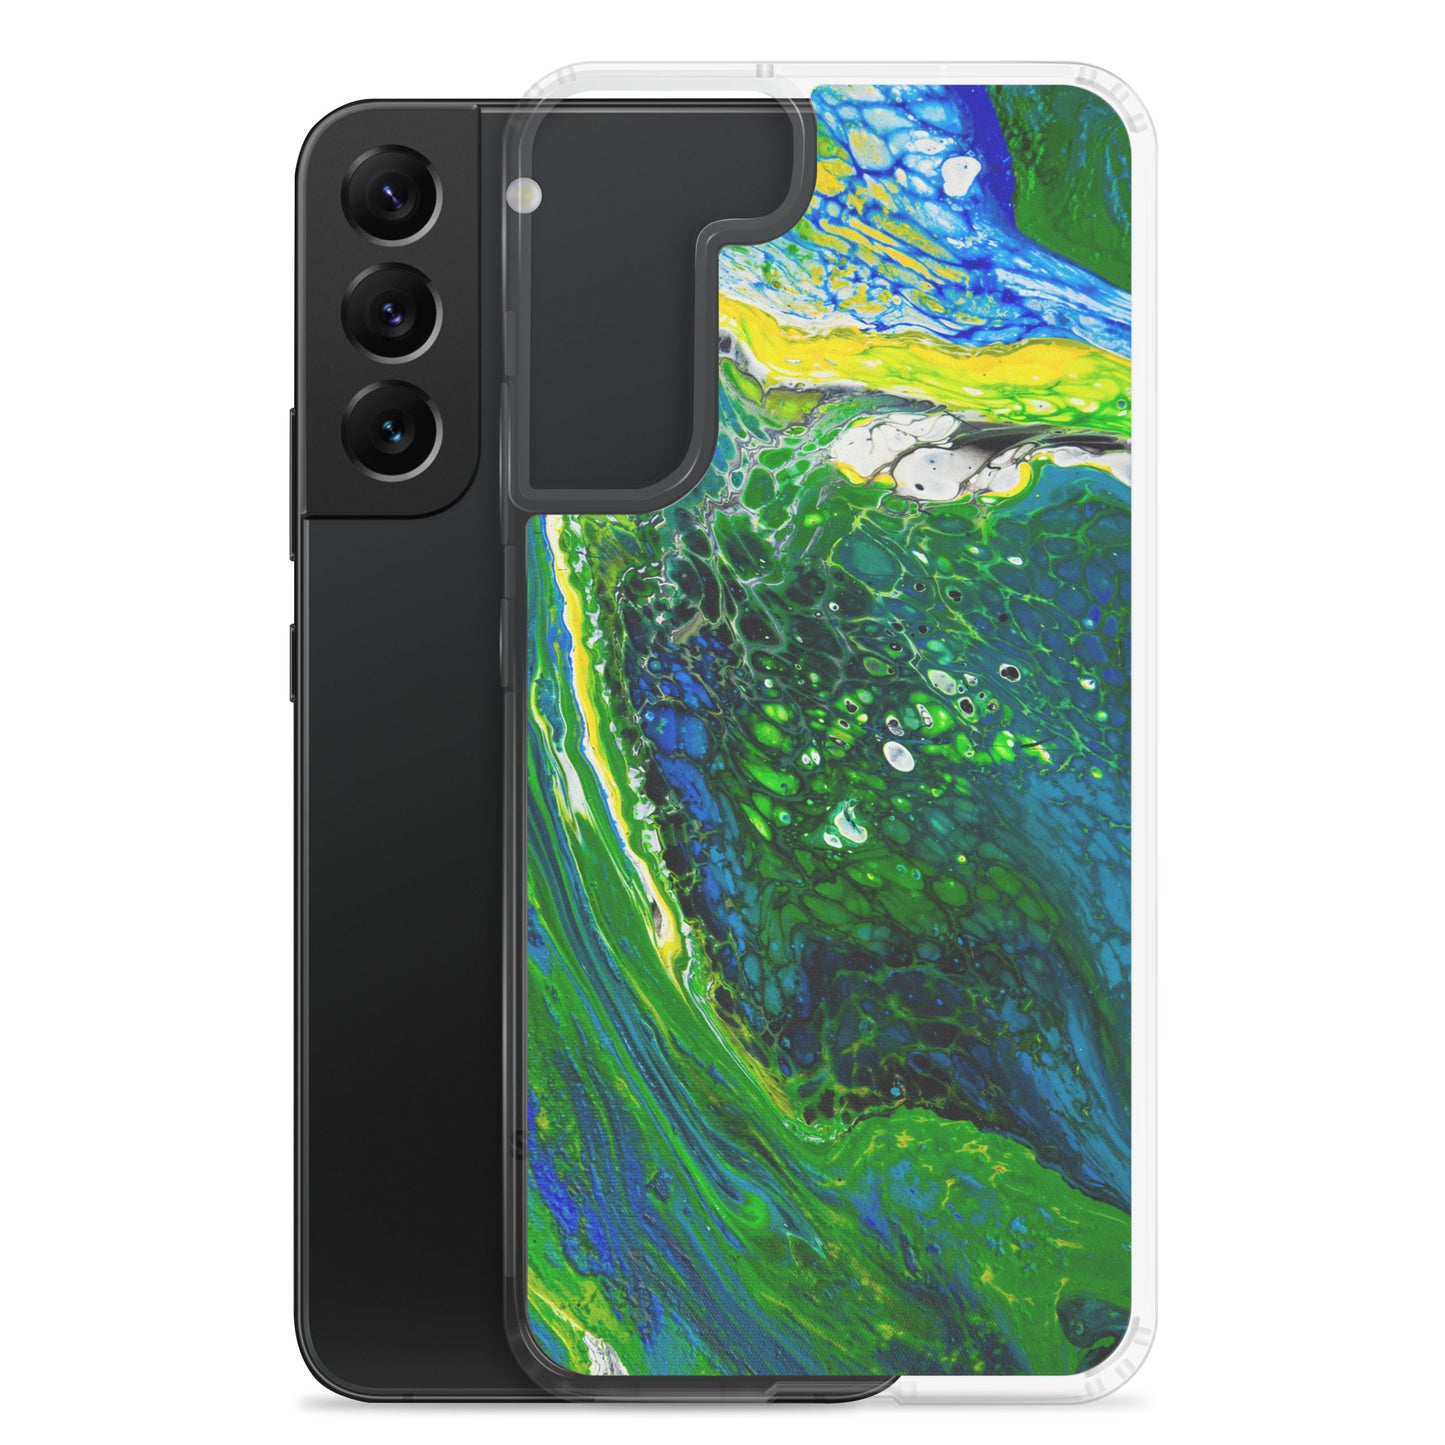 NightOwl Studio Custom Phone Case Compatible with Samsung Galaxy, Slim Cover for Wireless Charging, Drop and Scratch Resistant, Green Stream